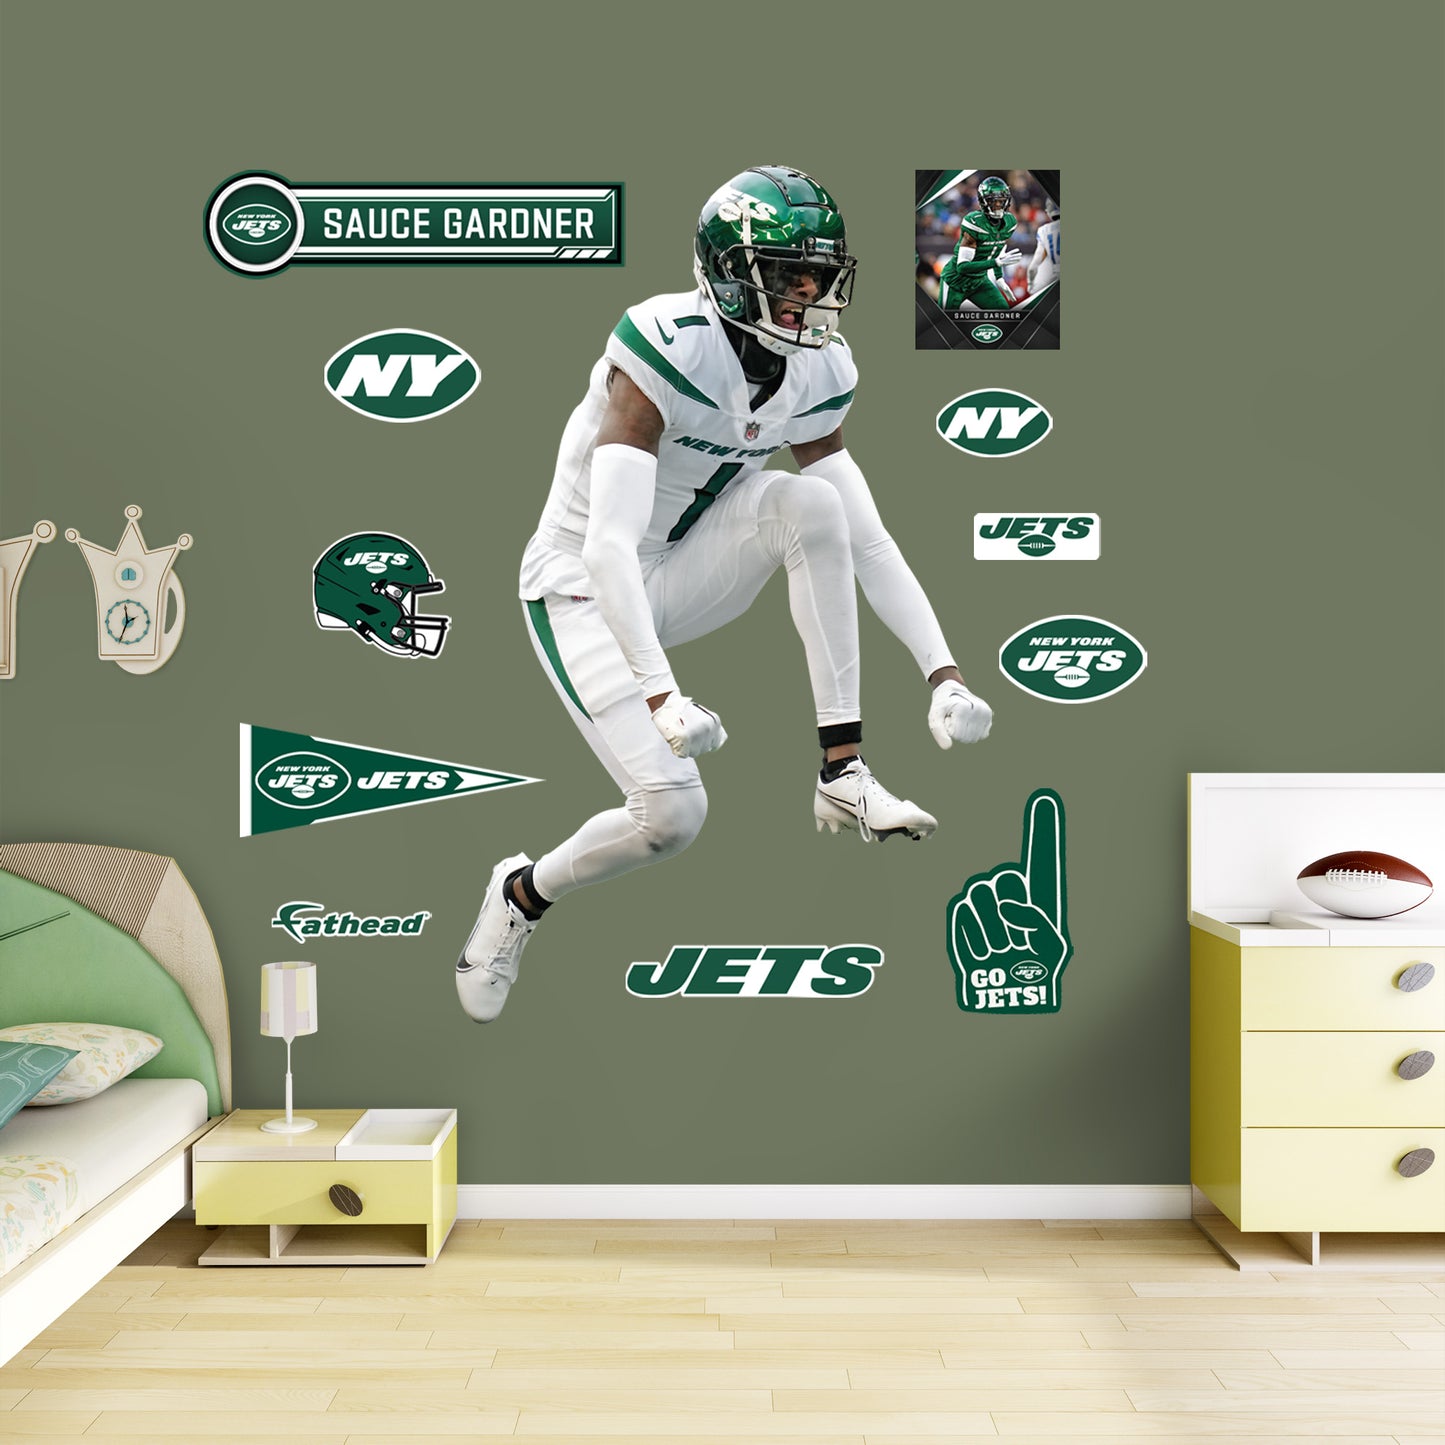 New York Jets: Sauce Gardner Celebration        - Officially Licensed NFL Removable     Adhesive Decal